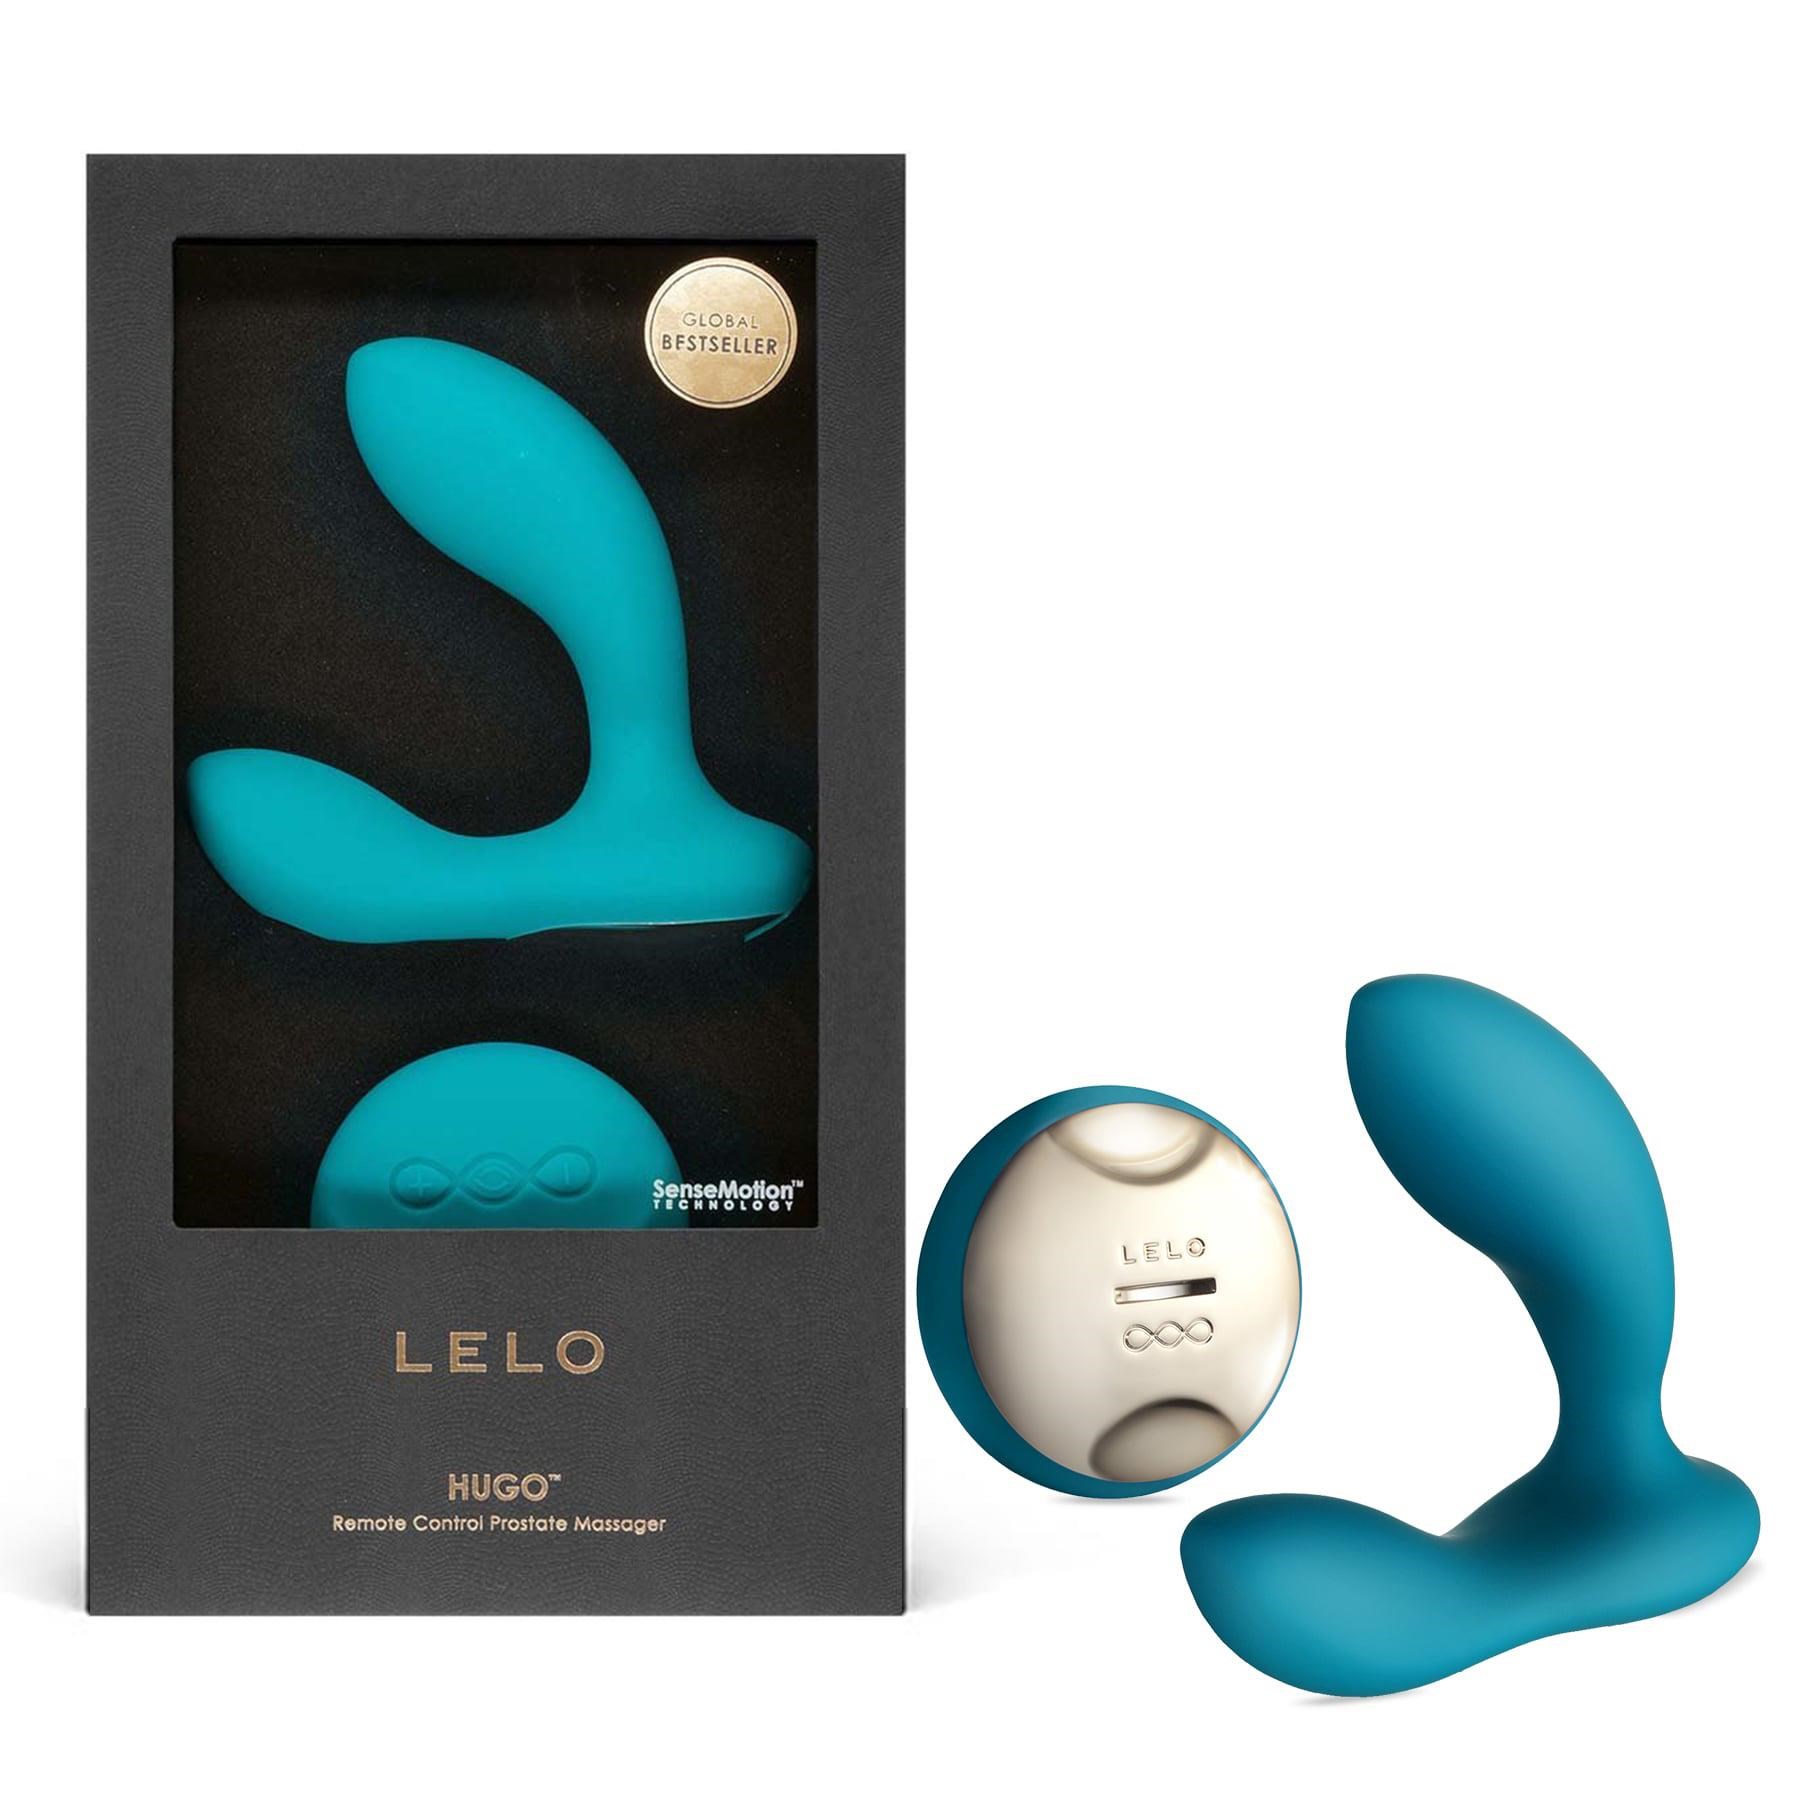 Lelo Hugo Prostate Massager - Product and Packaging